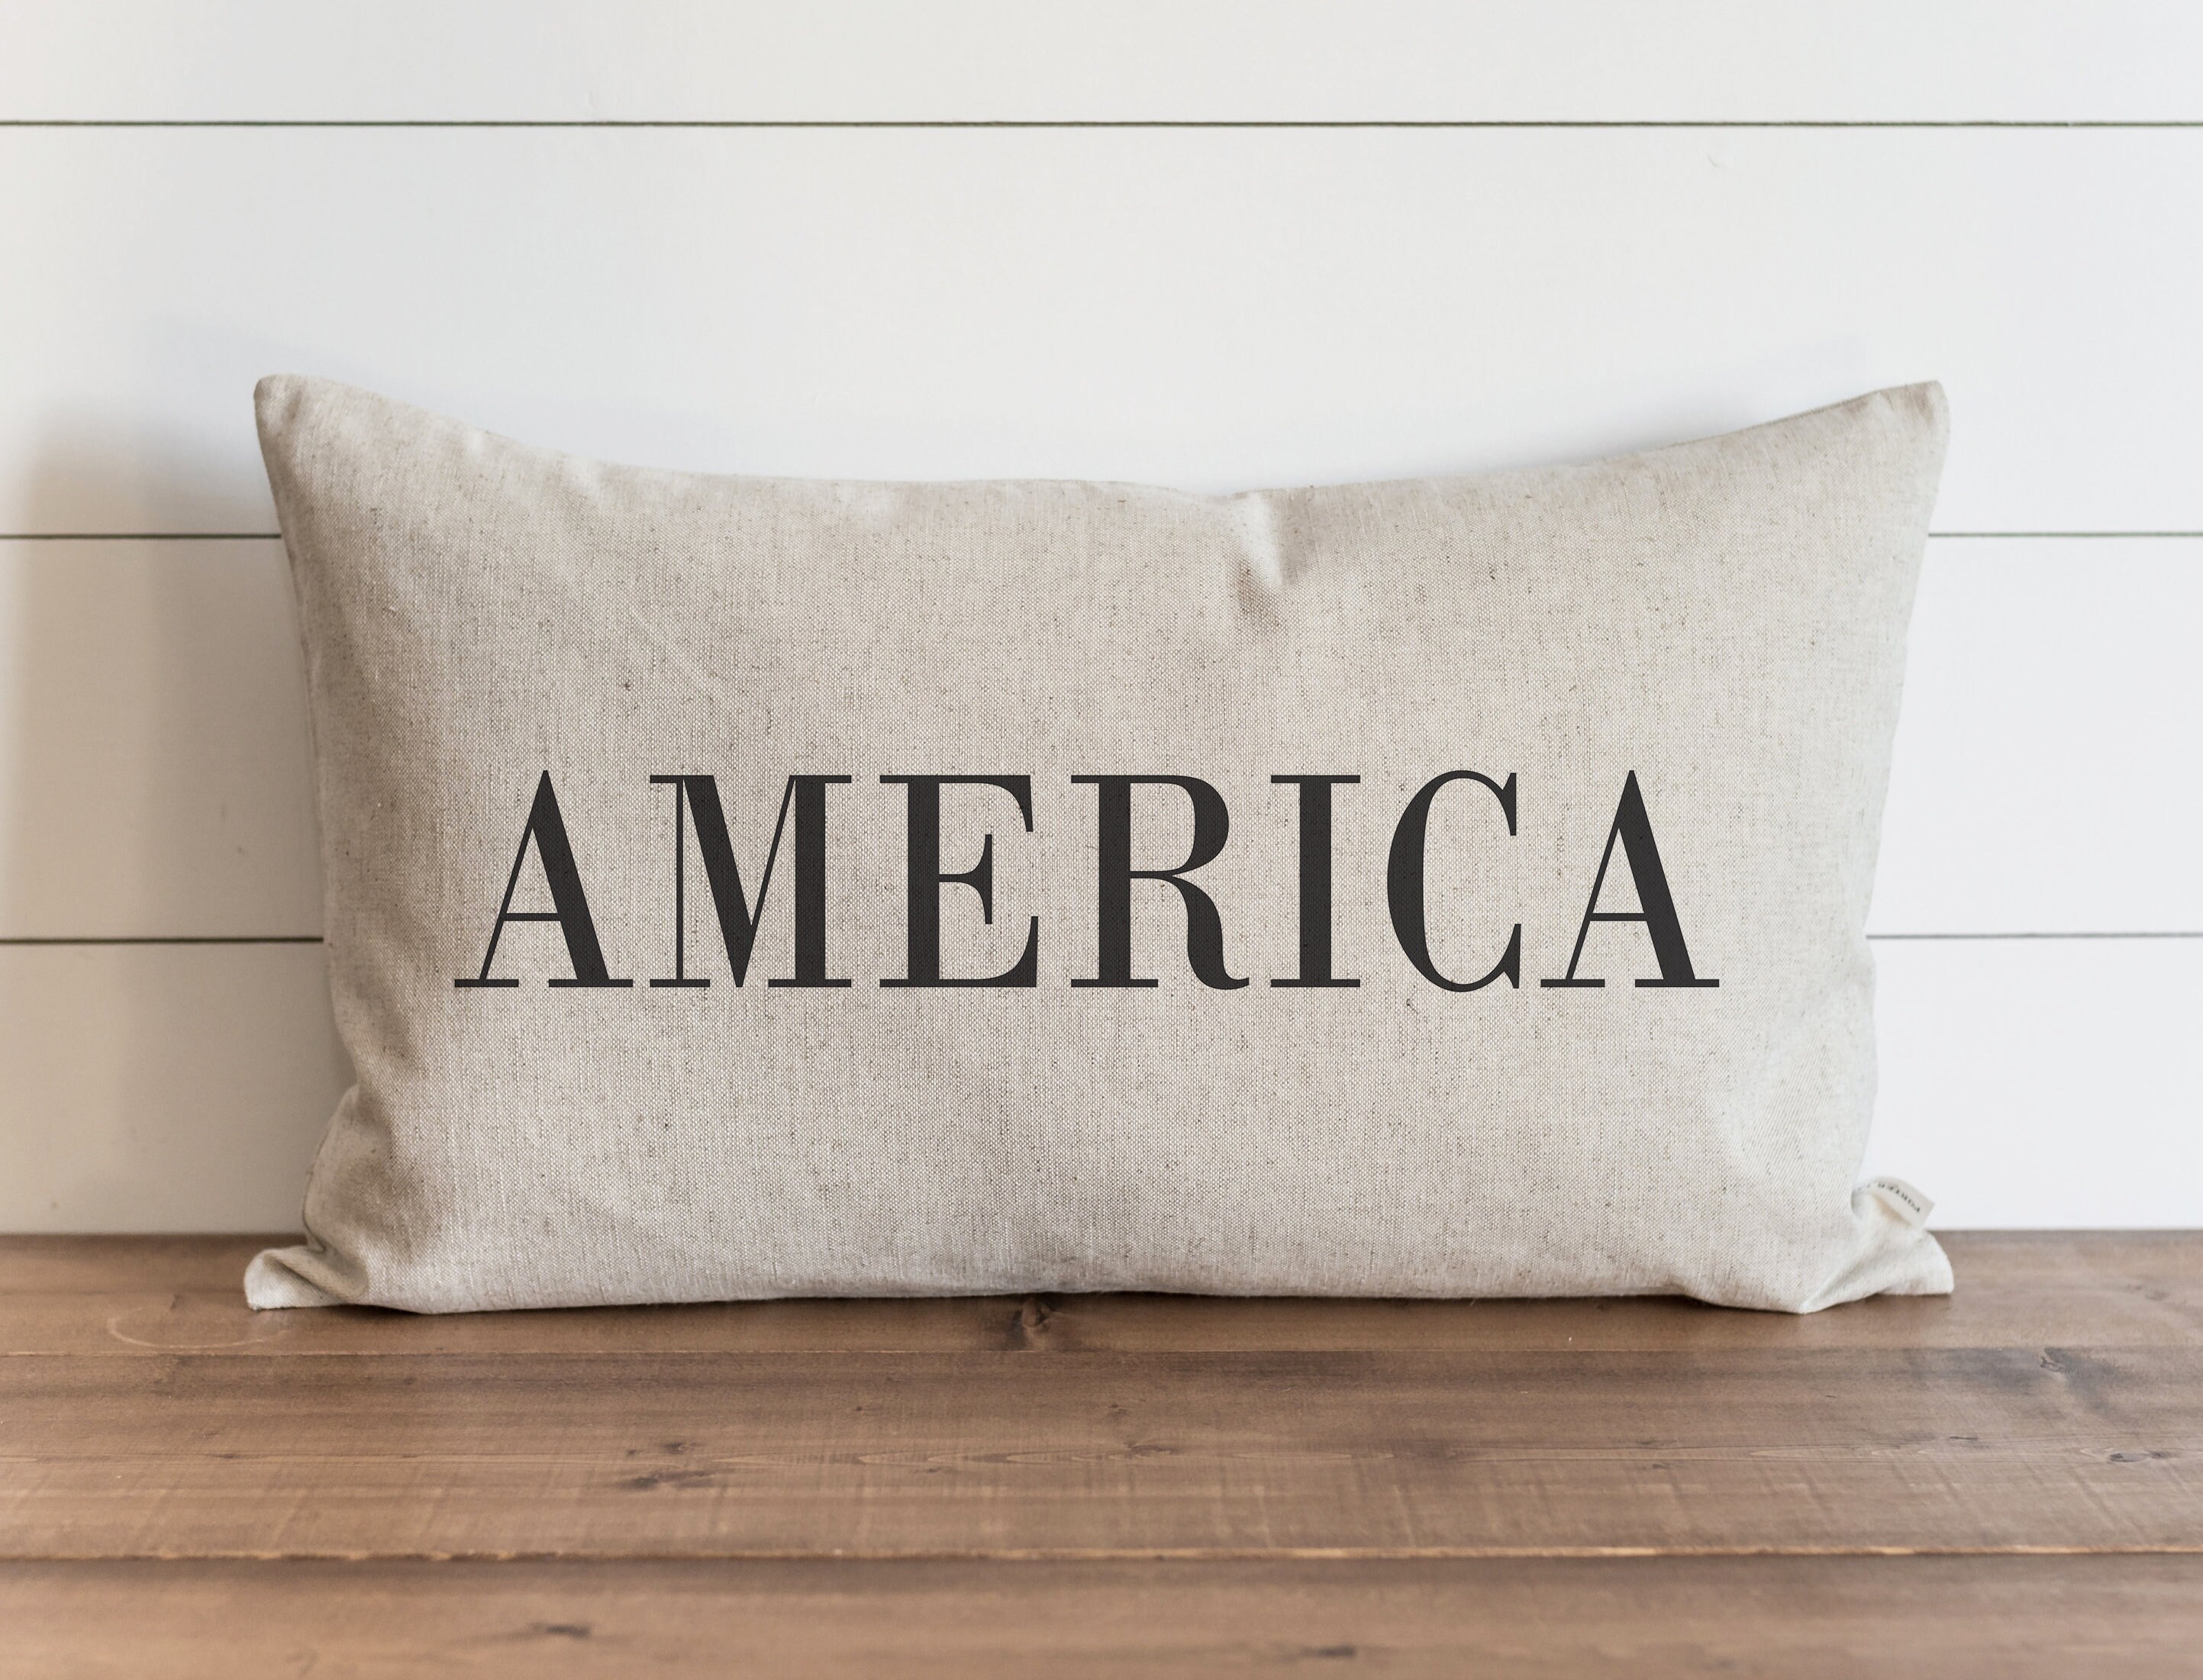 STRYAO 4th of July Pillow Covers 18x18 Inch Independence Day Throw